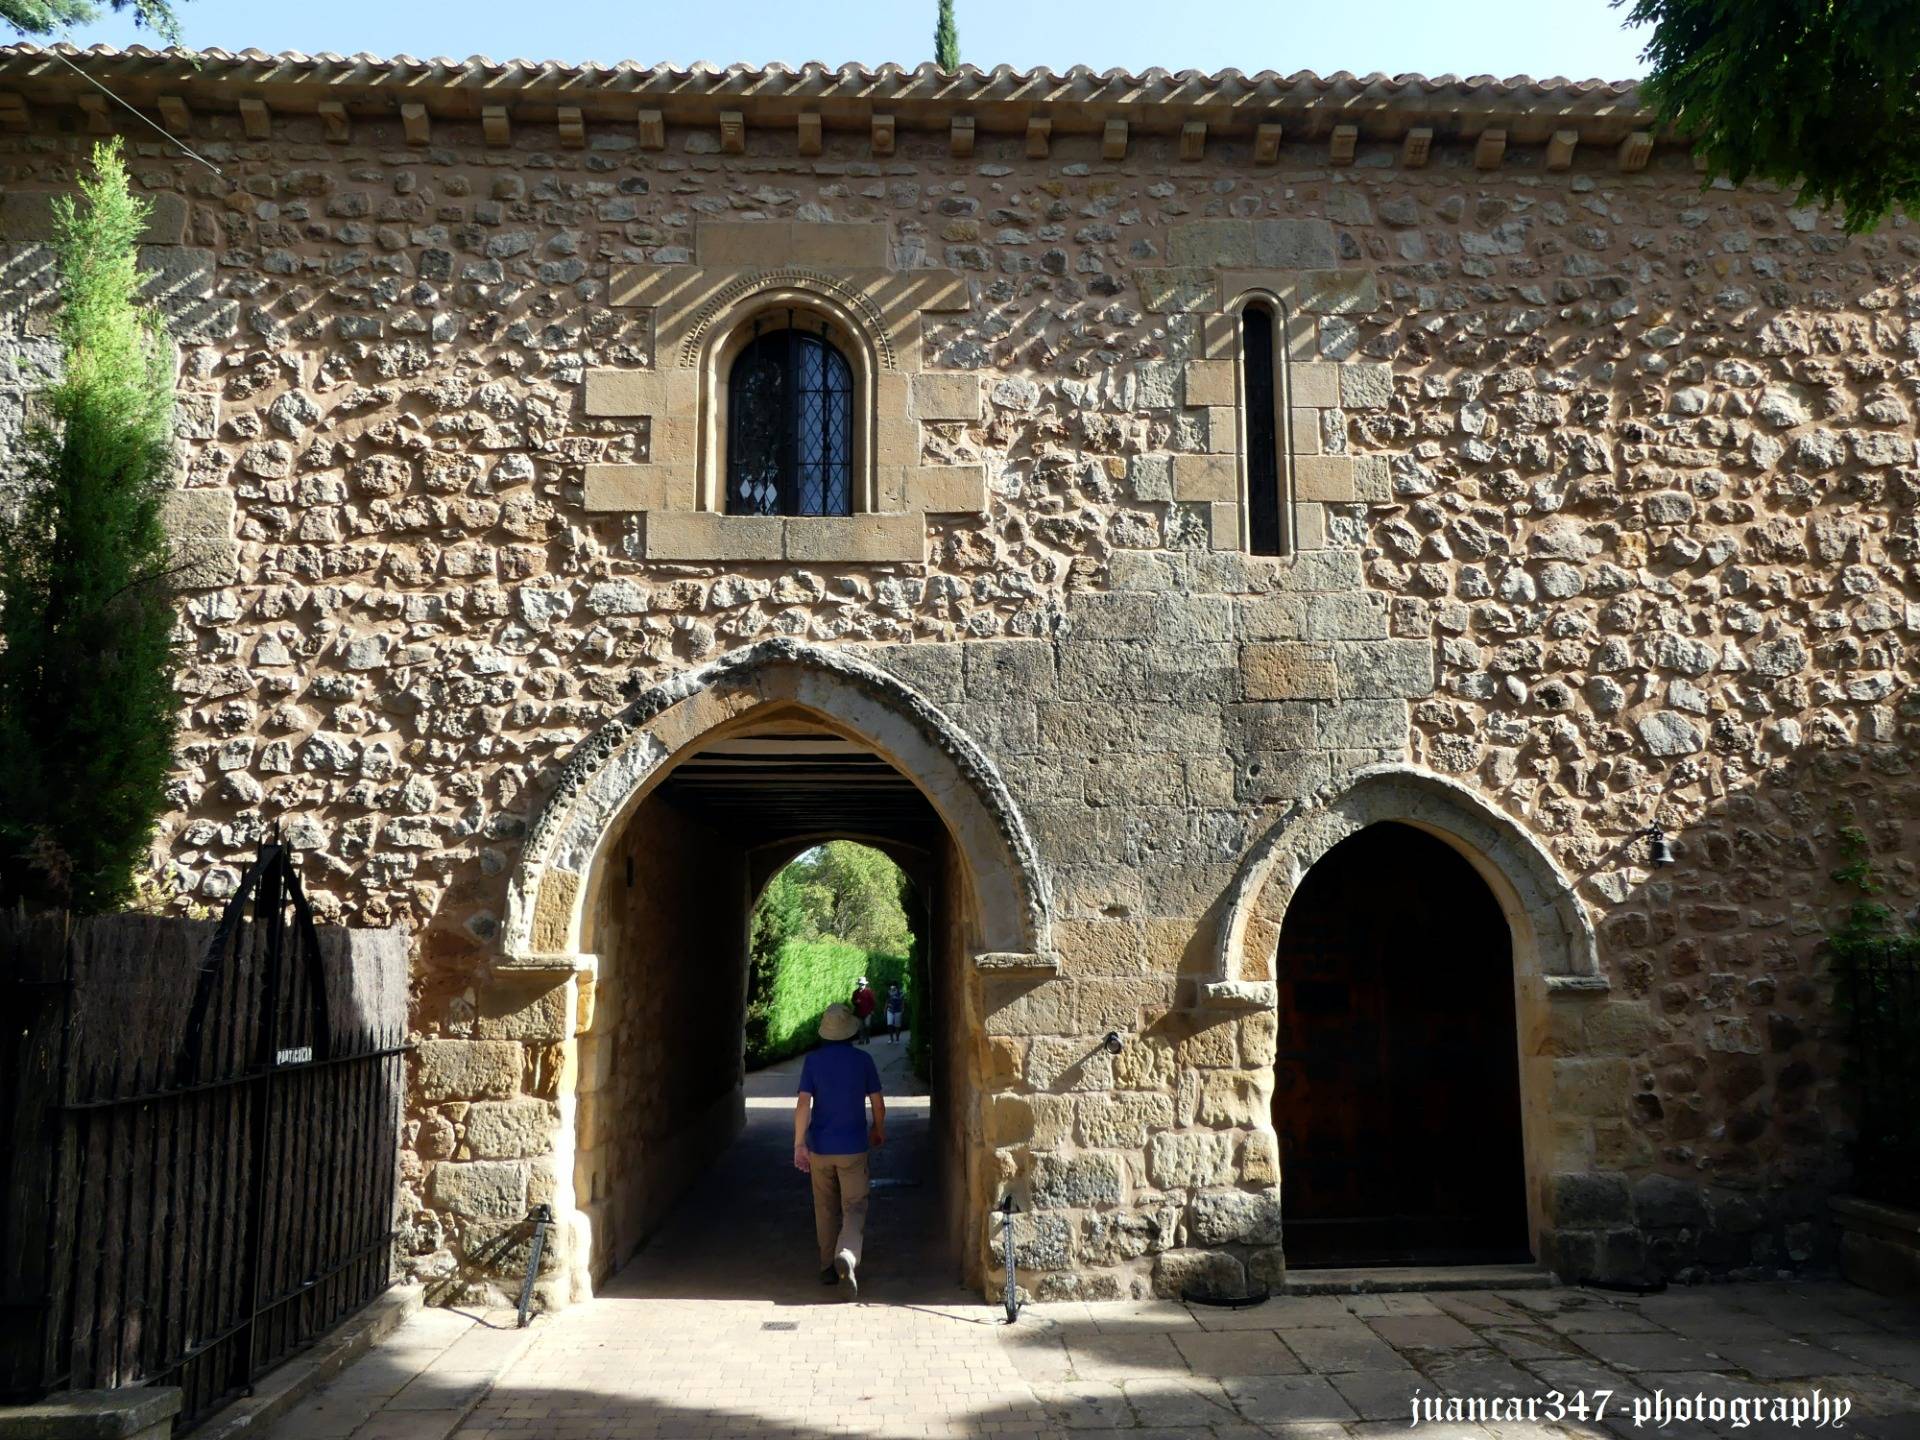 Former Templar monastery of San Polo, currently private property.